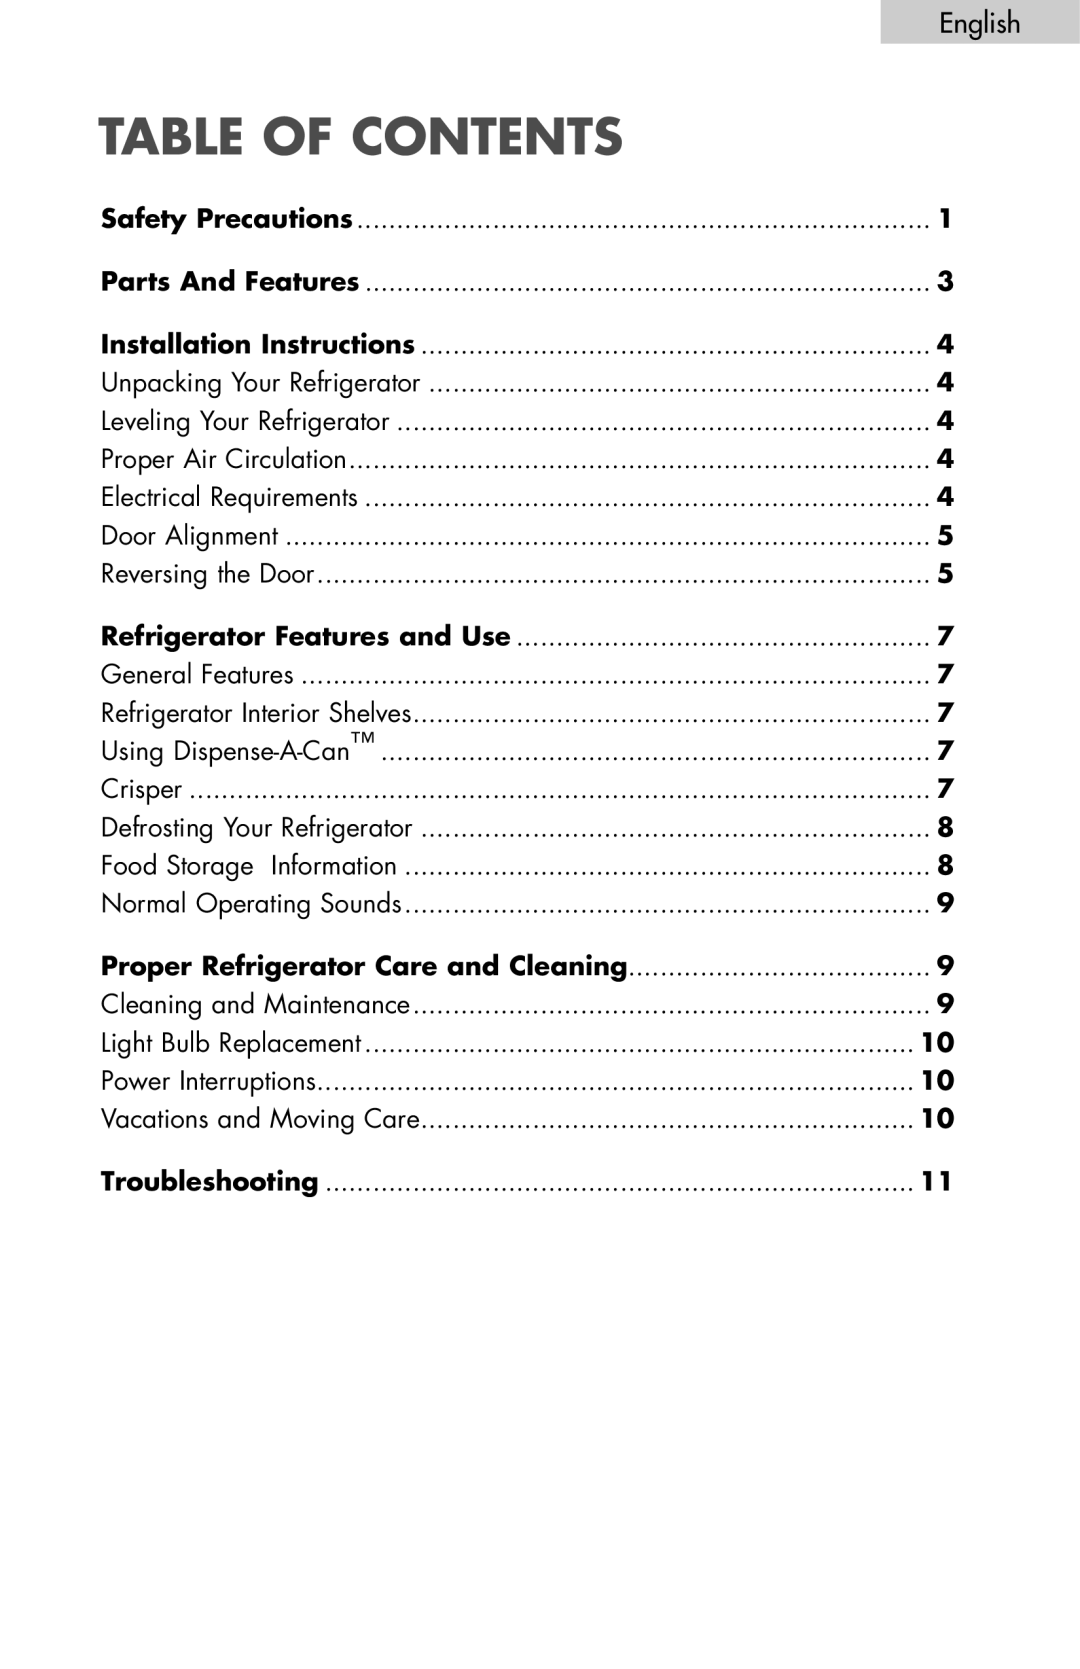 Igloo FR834B, FR832 user manual table of contents, English 